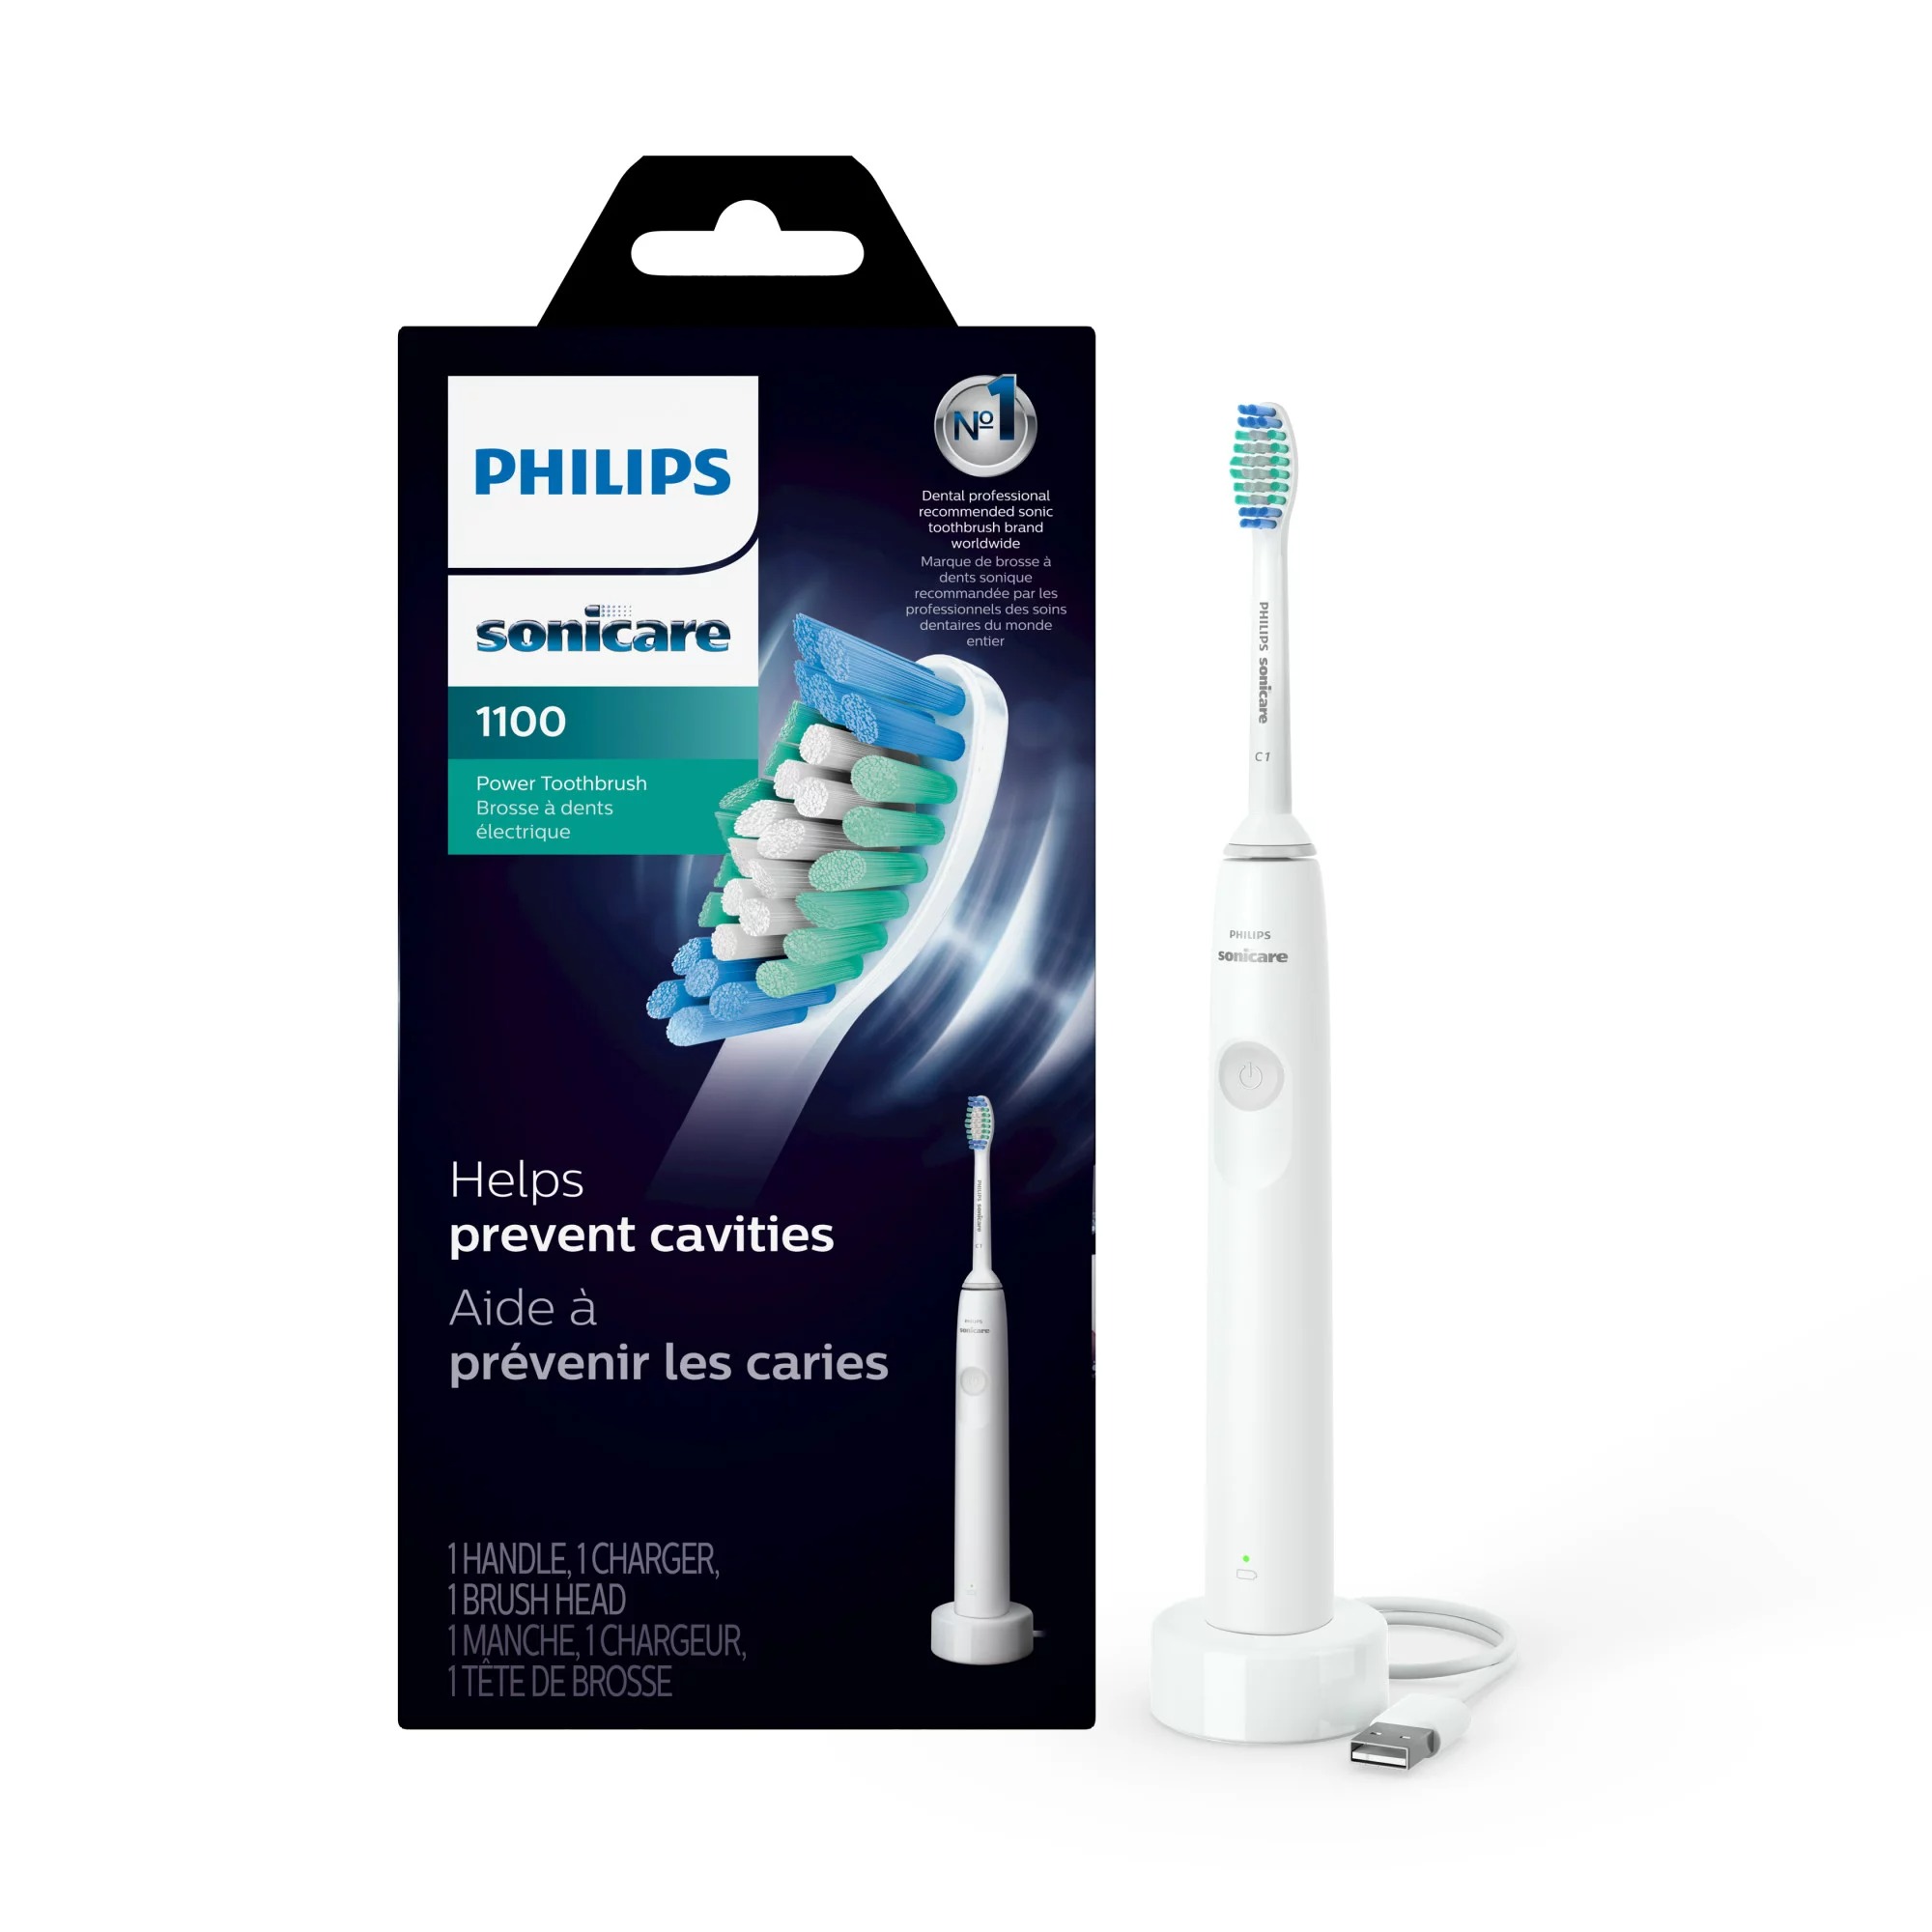 Philips Sonicare 1100 Power Toothbrush, Rechargeable Electric Toothbrush, White Grey HX3641/02 *YMMV*- In-Store Only $9.99